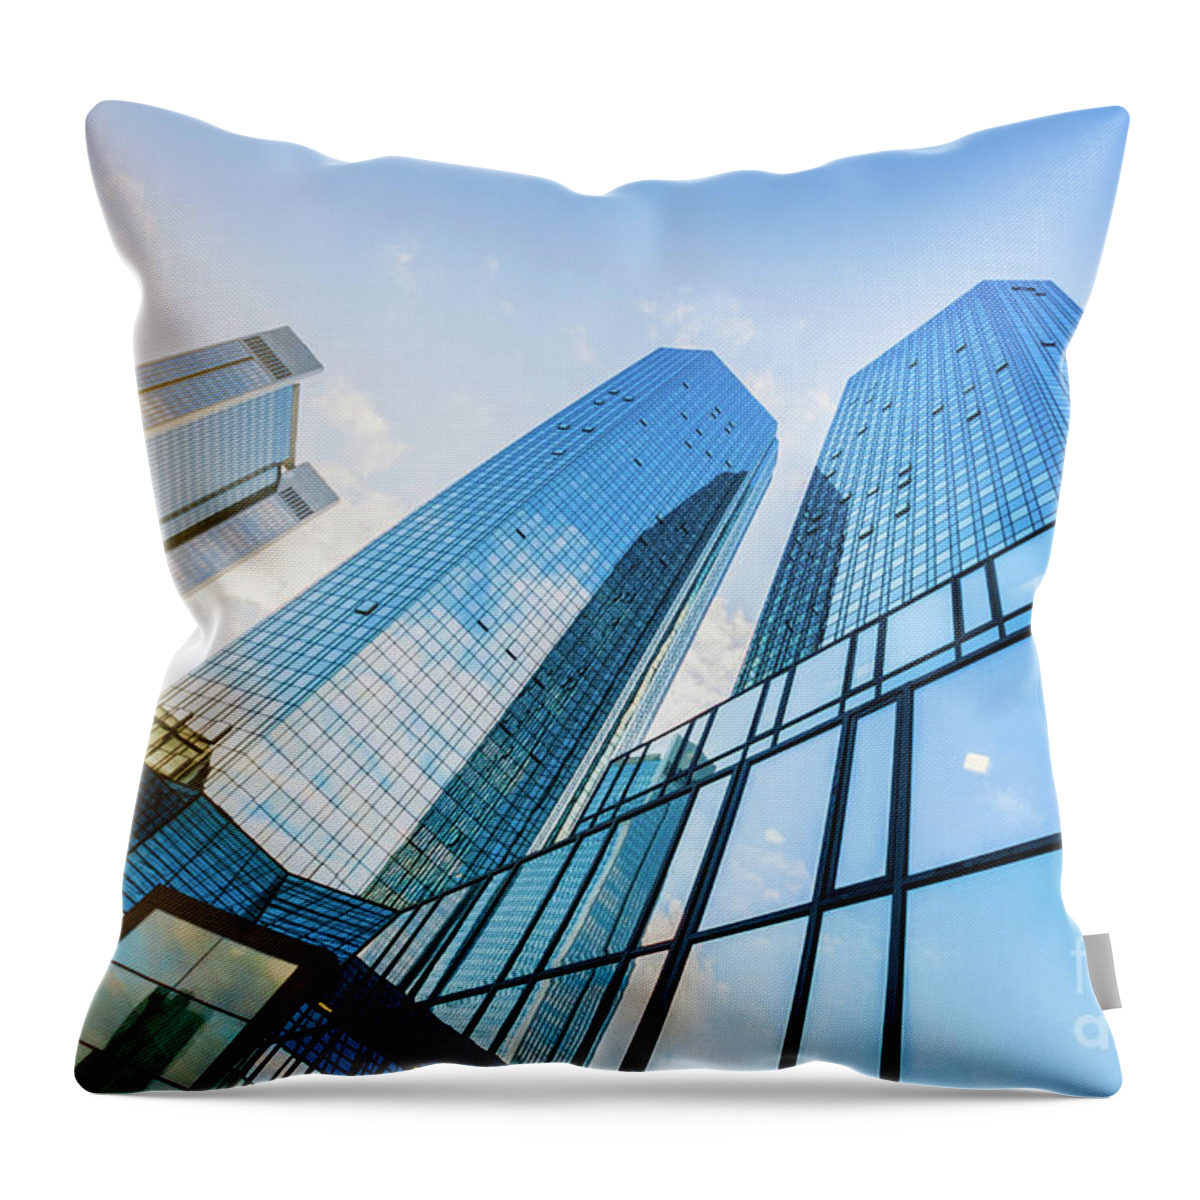 Abstract Throw Pillow featuring the photograph Skyscrapers by JR Photography